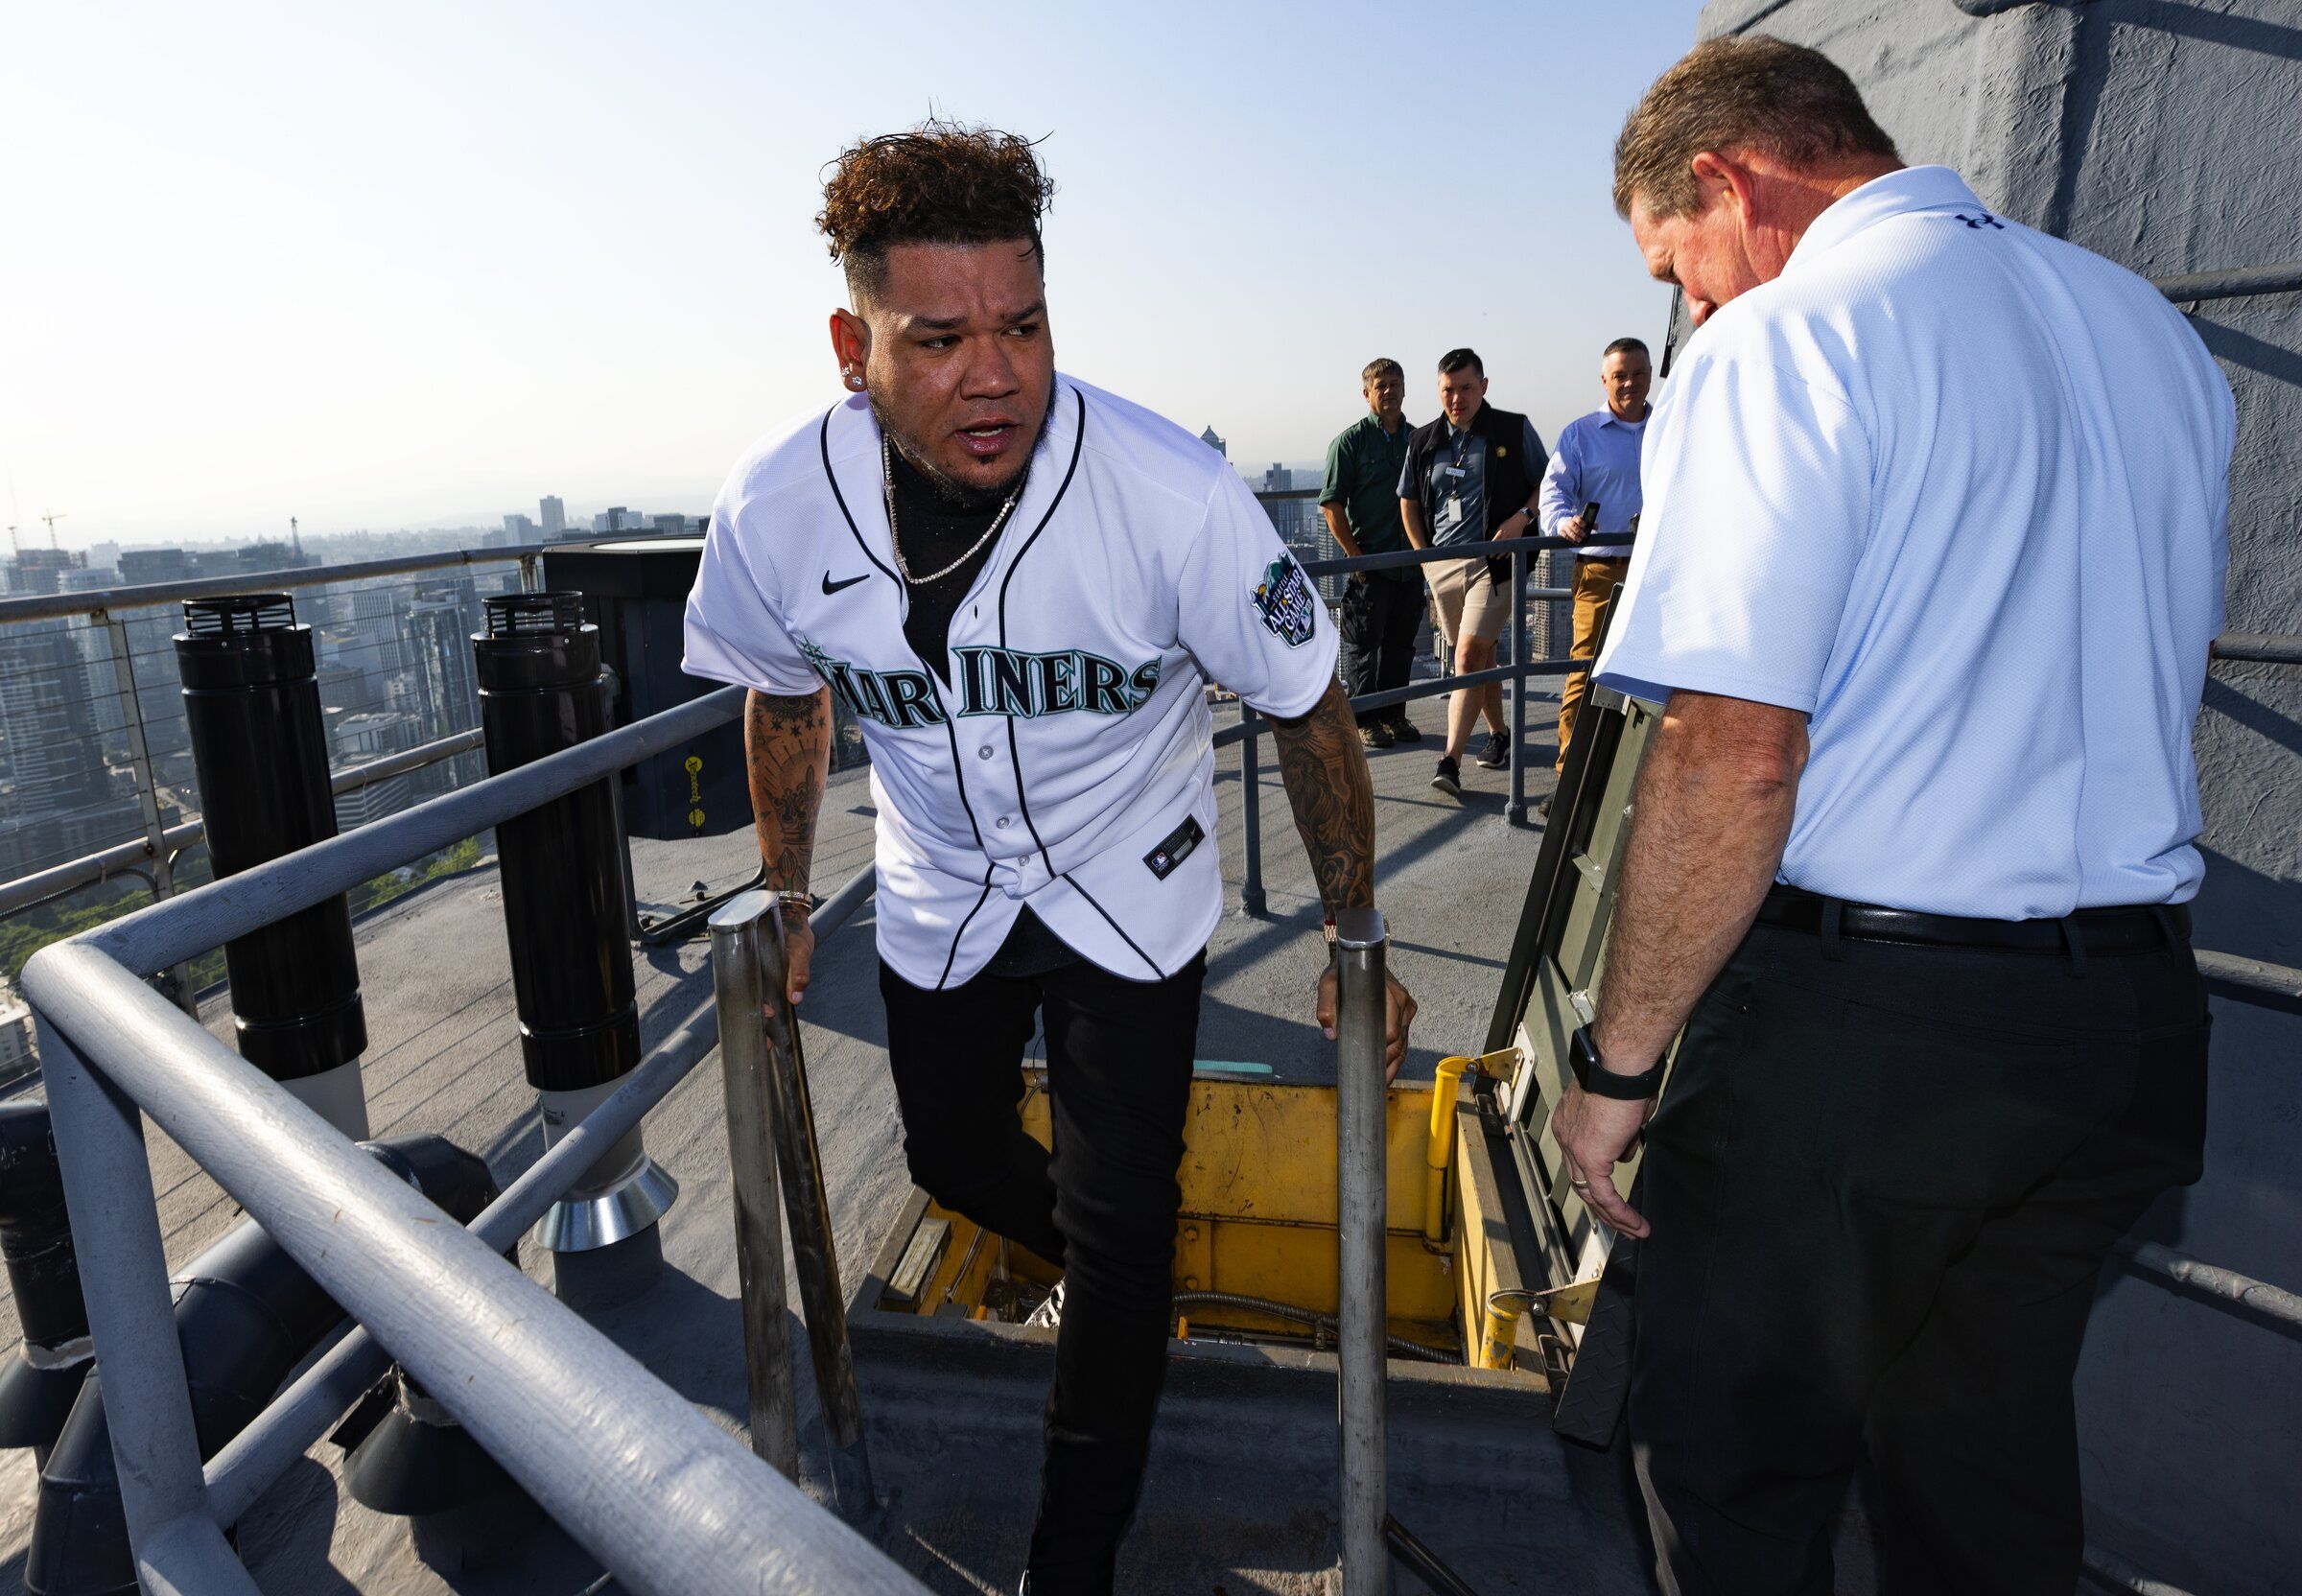 After emotional Mariners exit in 2019, Felix Hernandez says, 'I'm over  that